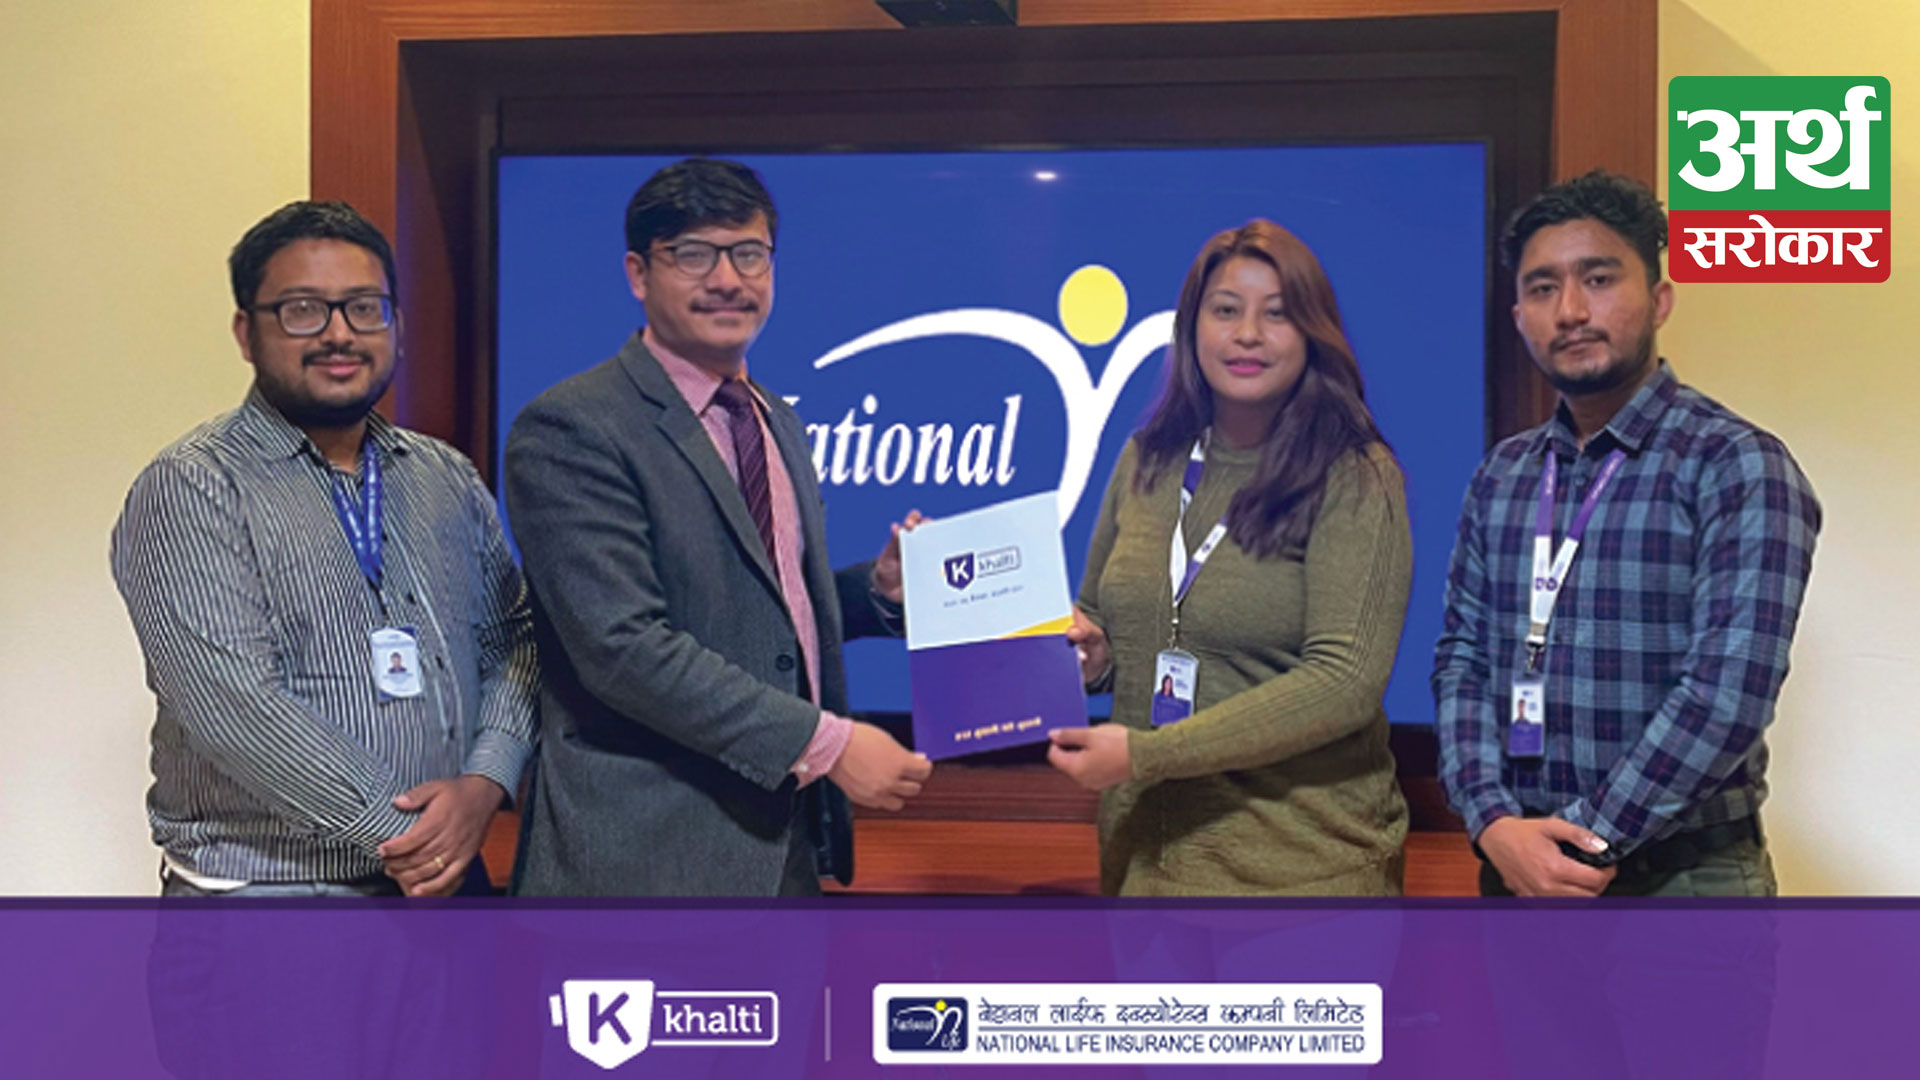 National Life Insurance premium payment available in Khalti, along with Cashback offer